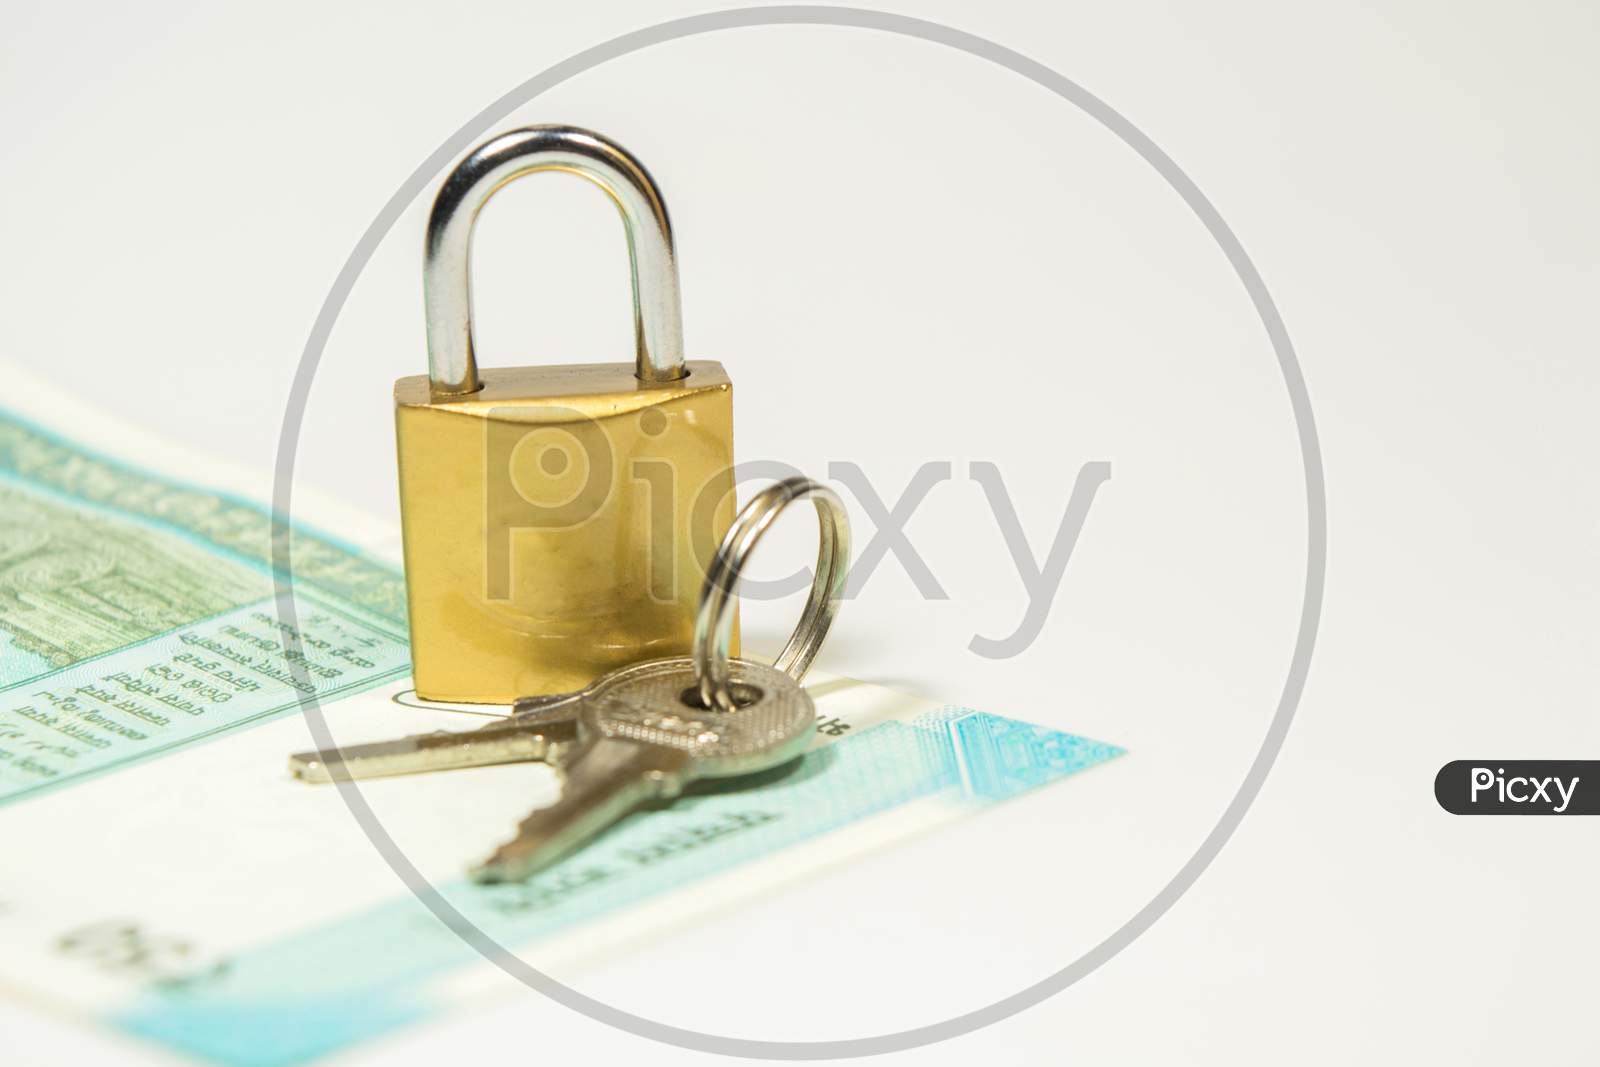 New 50 Rupees Indain Curency With Lock And Keys On Isolated White Background